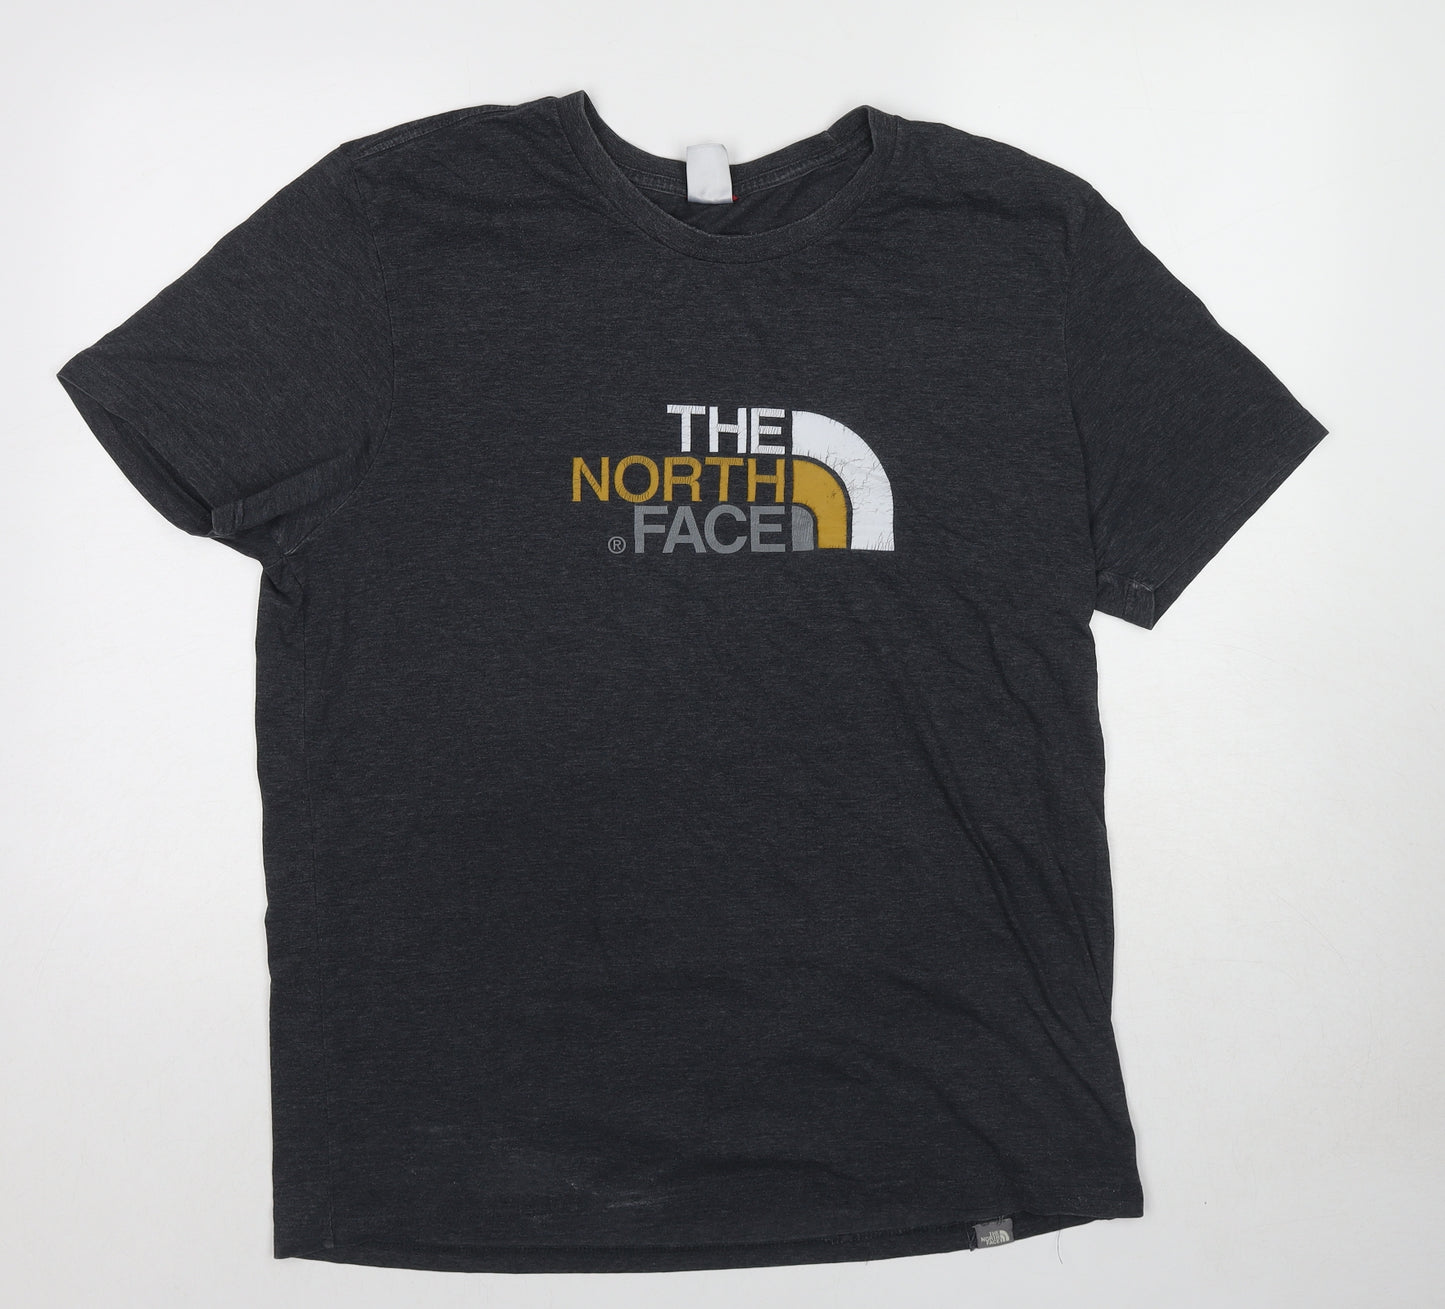 The North Face Mens Grey Cotton T-Shirt Size XL Round Neck